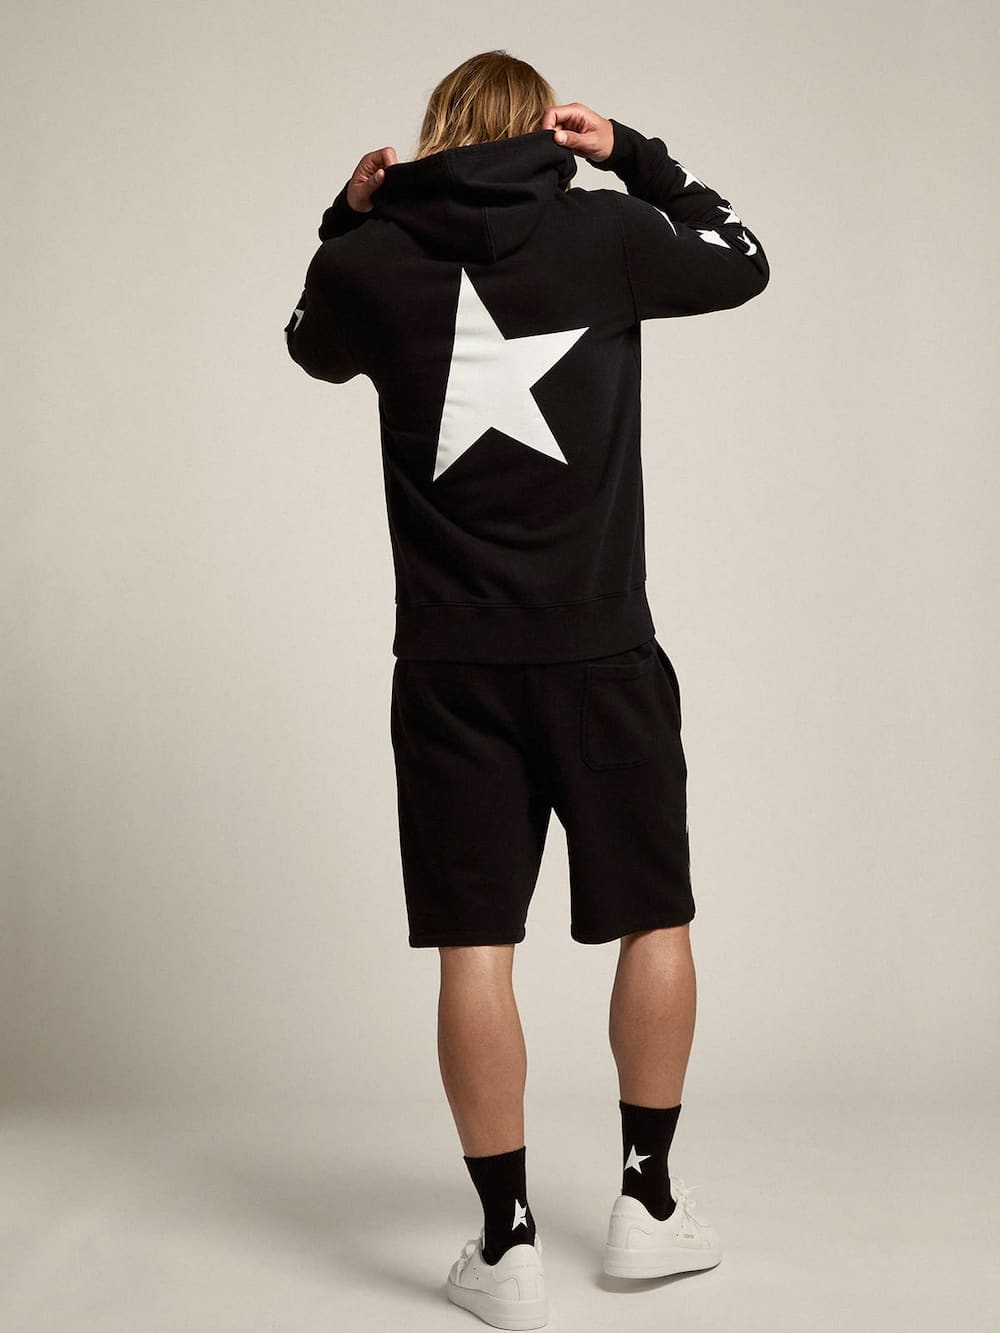 Golden Goose - Black Alighiero Star Collection sweatshirt with contrasting white stars in 